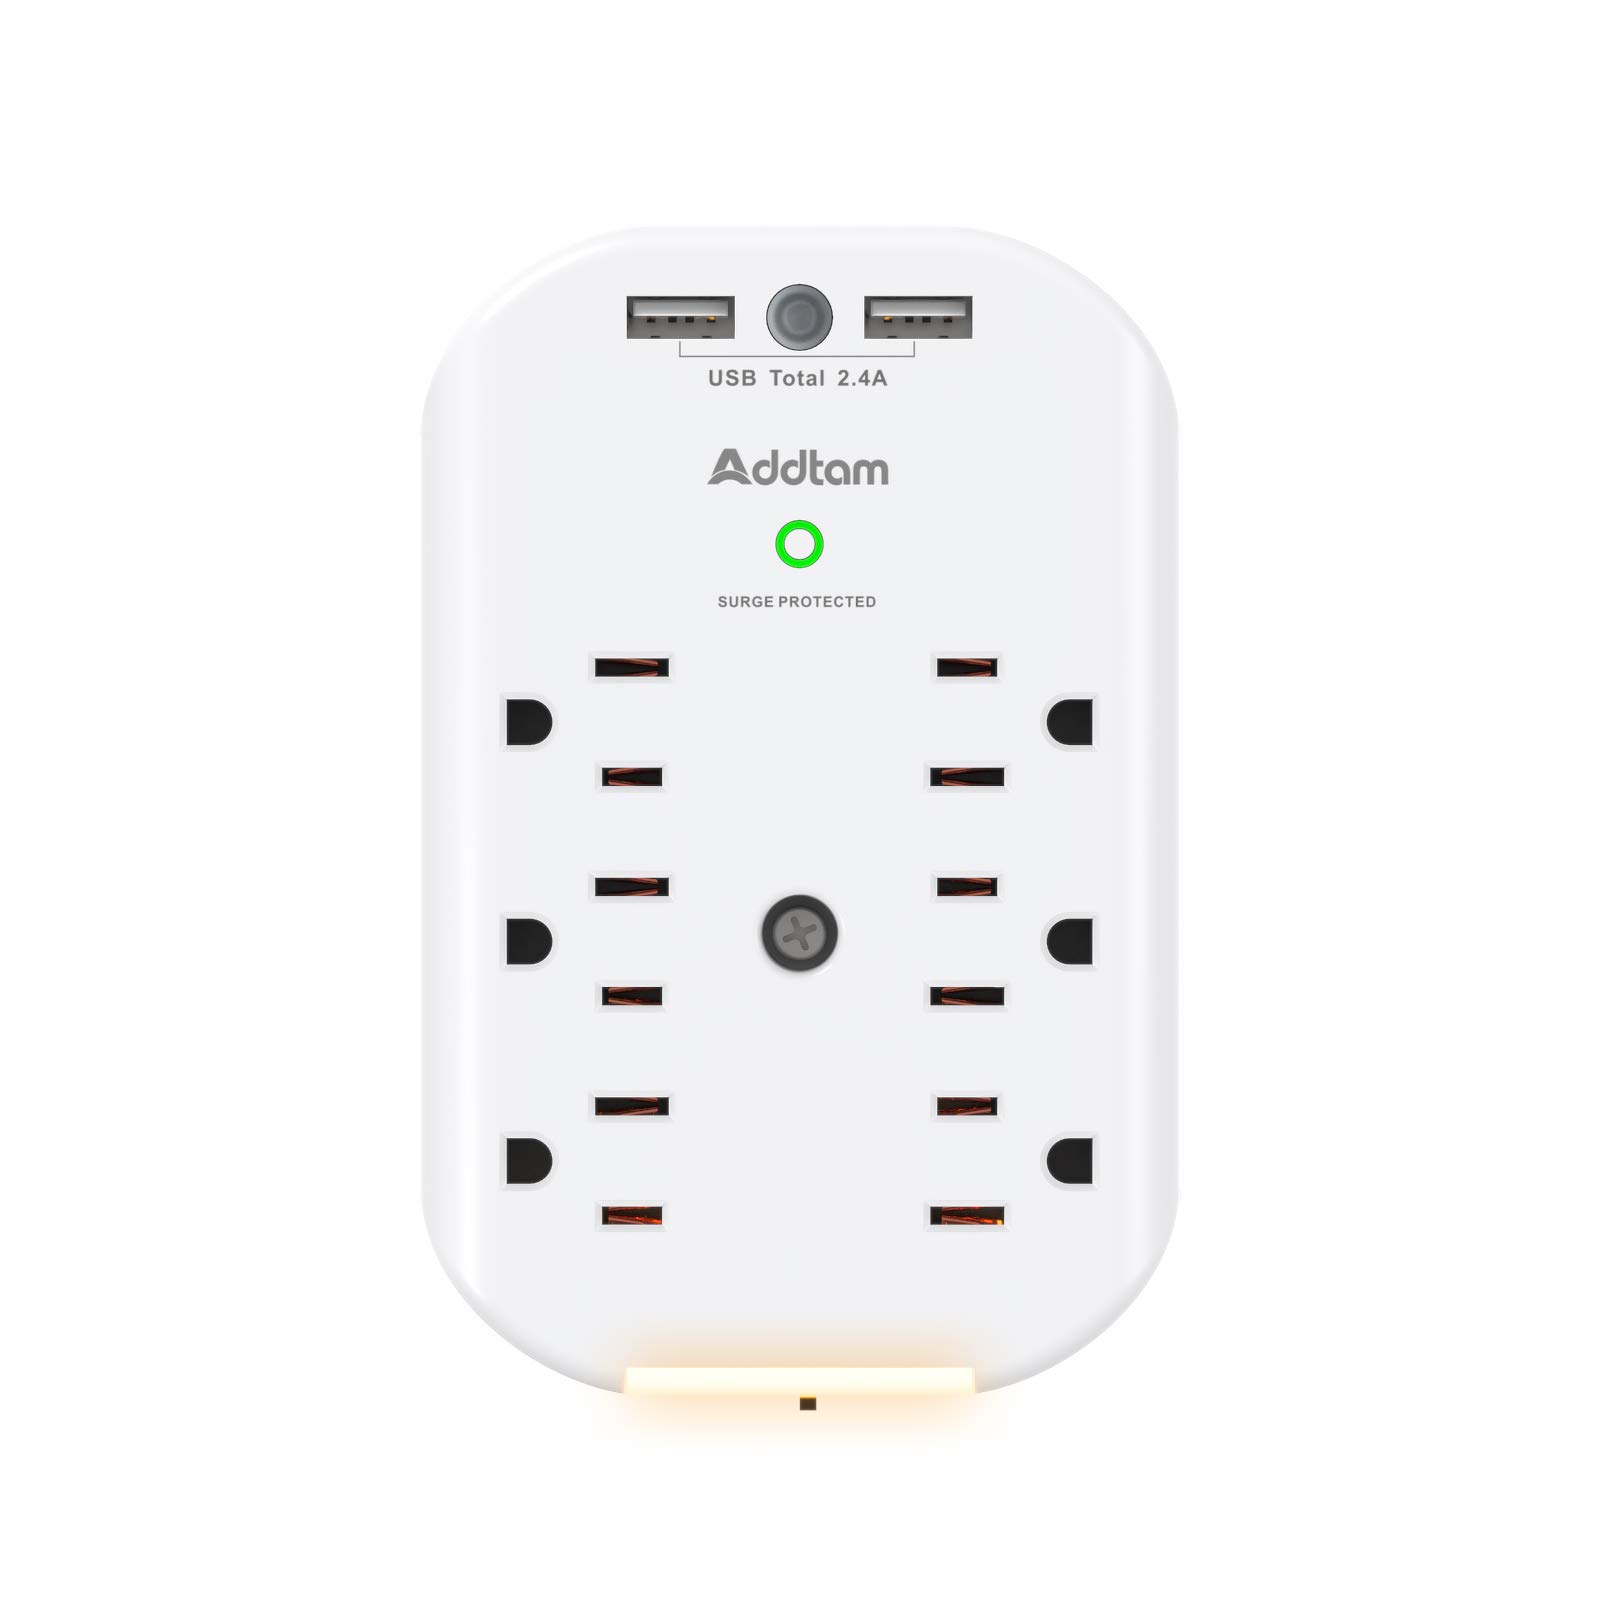 $9.89 6 Outlet Surge Protector, Addtam Wall Outlet Extender with Sensor Night Light, Multi Plug Outlet Wall Adapter Power Strip with 2 USB Charging Portss. - $9.89